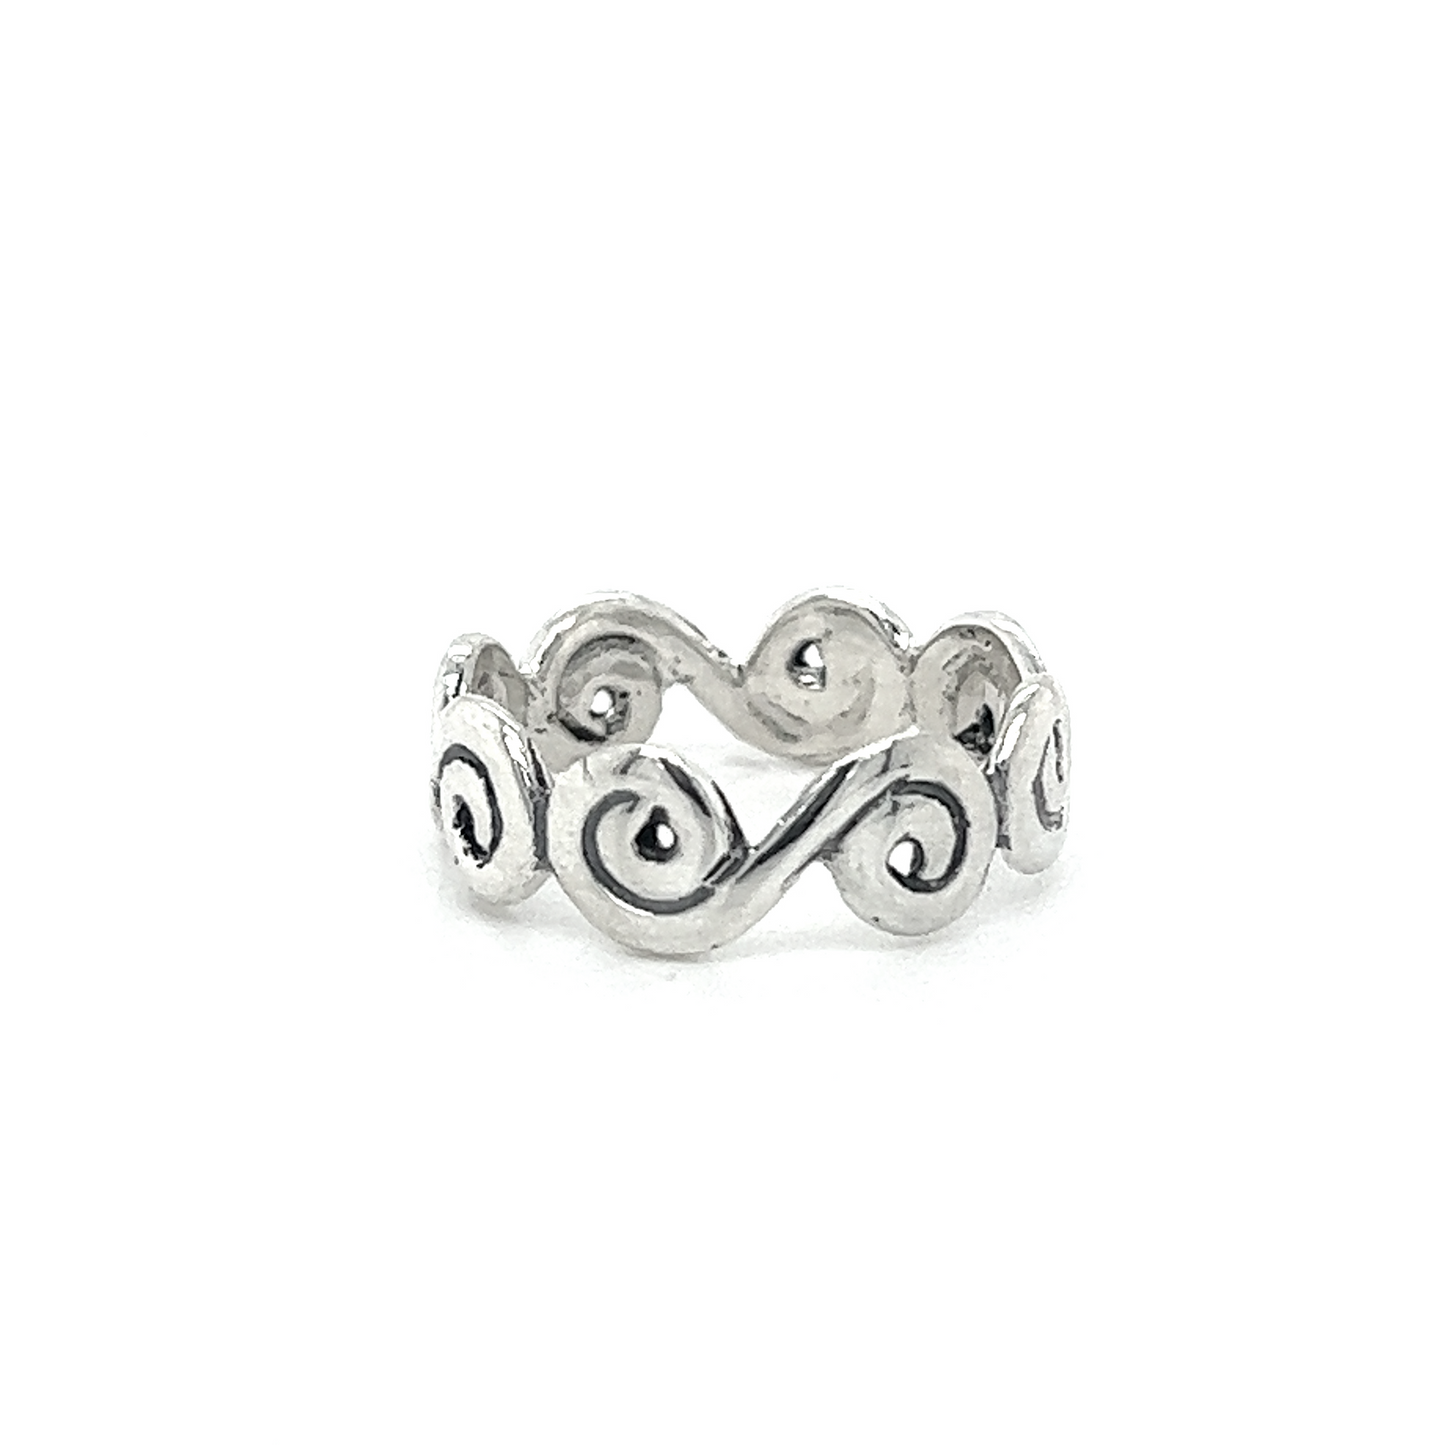 An abstract Wavy Swirl Band with swirling patterns.